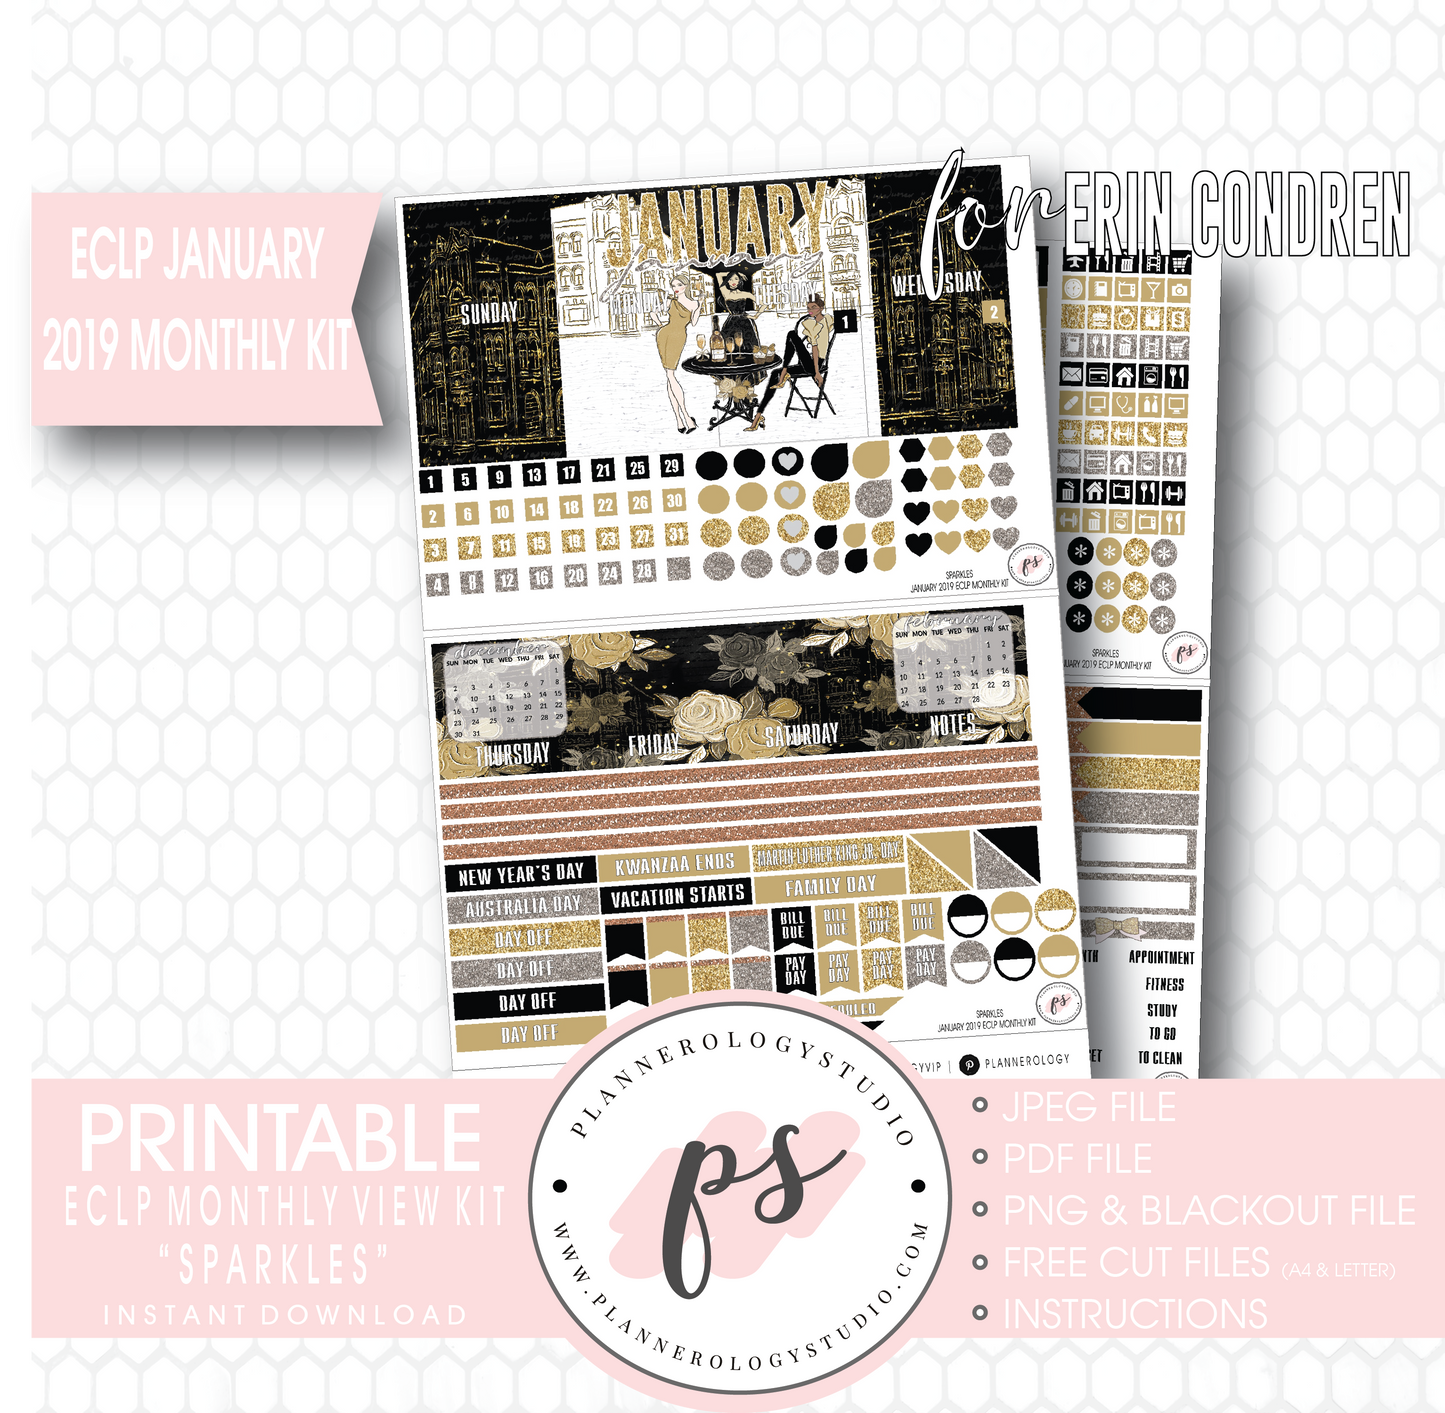 Sparkles New Years January 2019 Monthly View Kit Digital Printable Planner Stickers (for use with Erin Condren) - Plannerologystudio